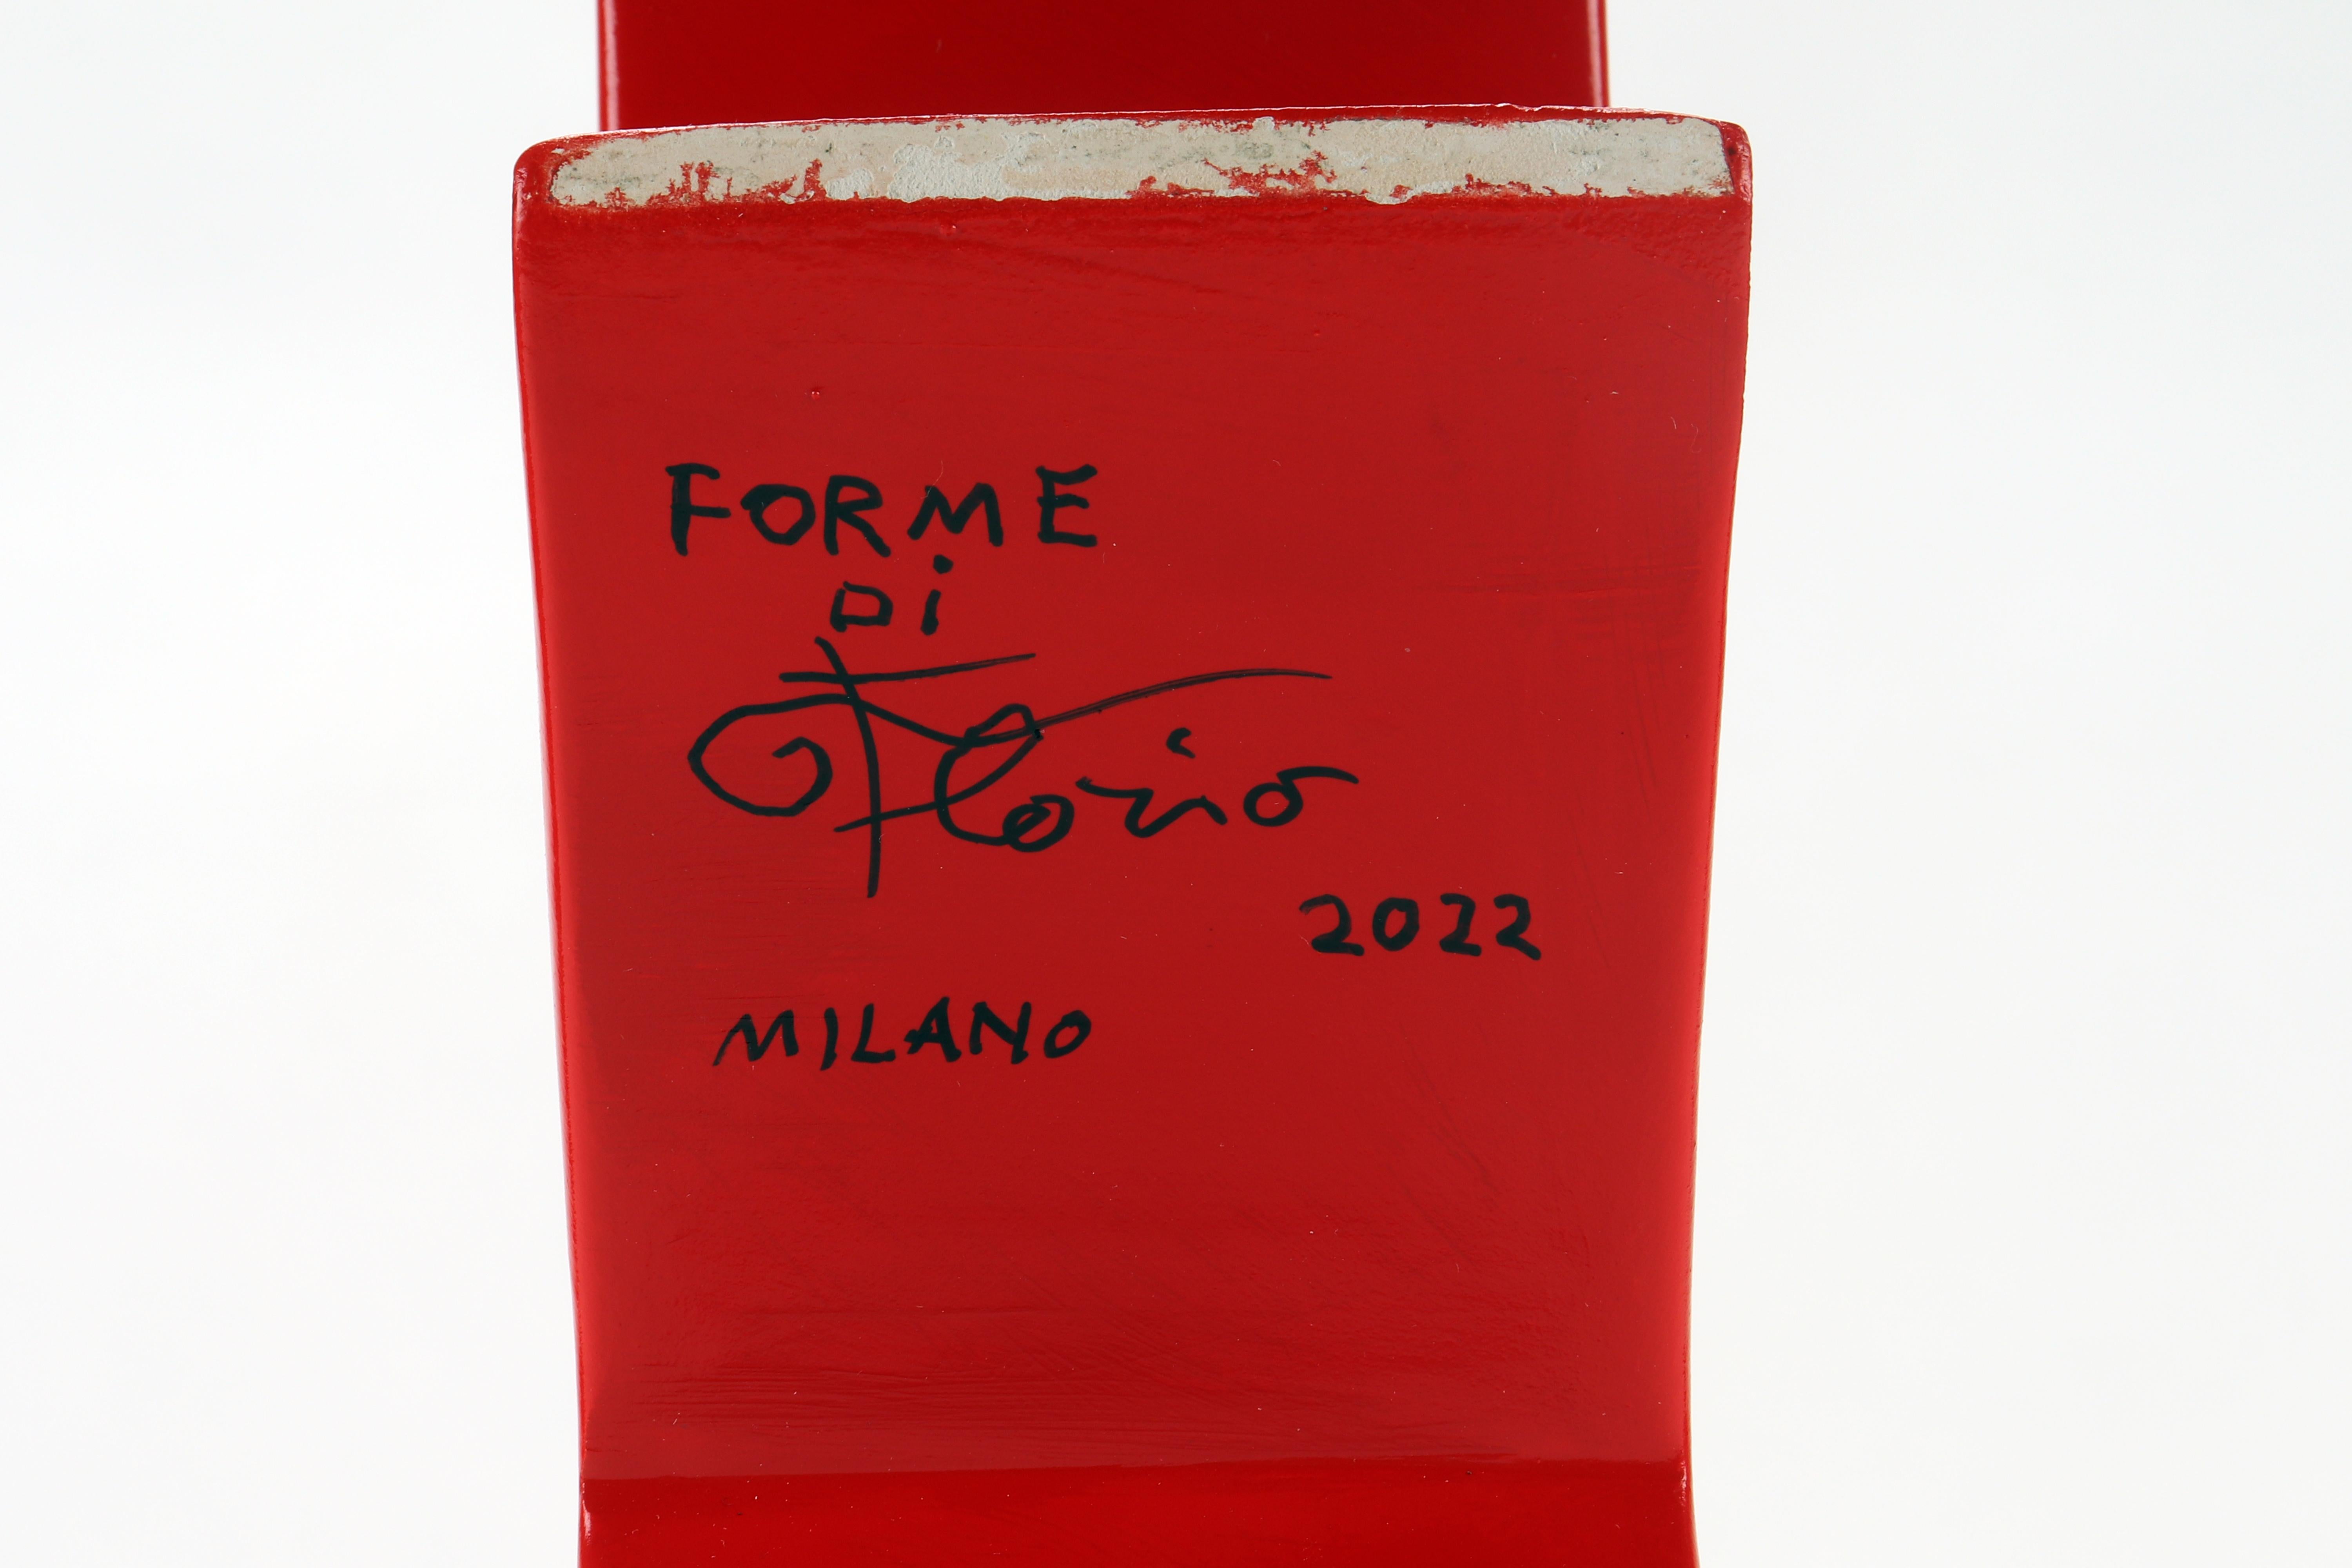 Ceramic Vase Memphis by Luciano Florio Paccagnella, Milan, 1990s For Sale 4